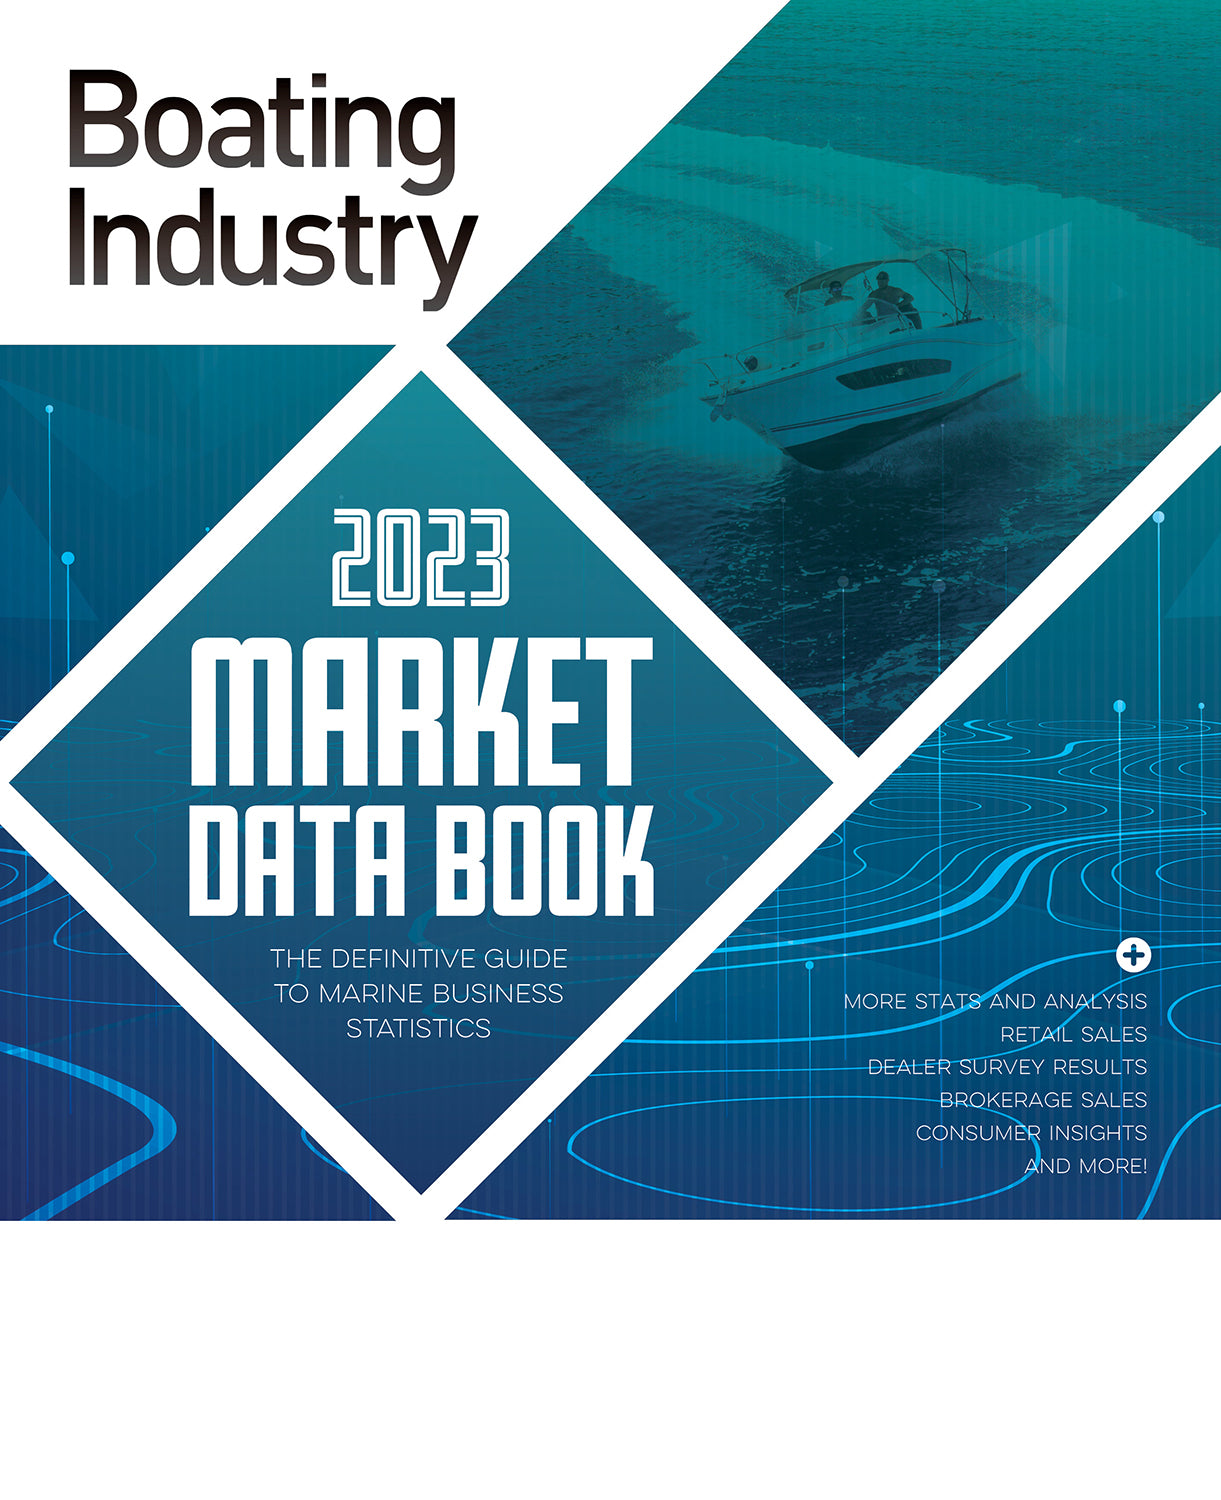 Boating Industry 2023 Market Data Book